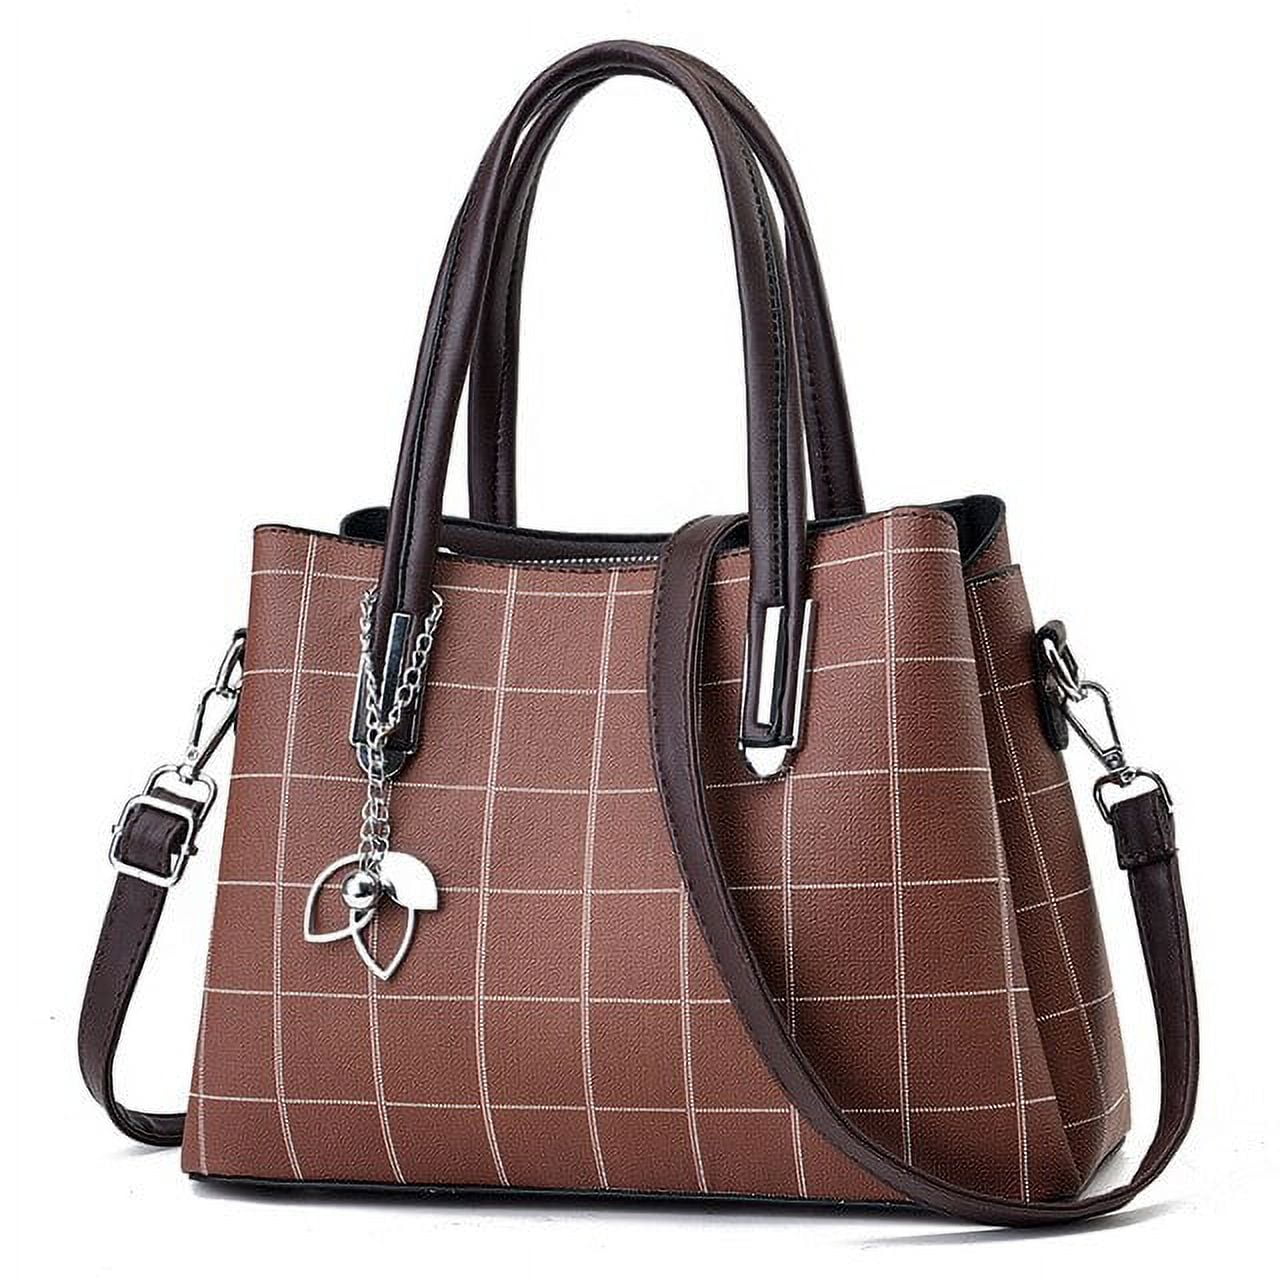 Buy PU Leather Latest Fashion Ladies Handbag With Sling Bag & Clutch Combo  3 Purse Set at Amazon.in